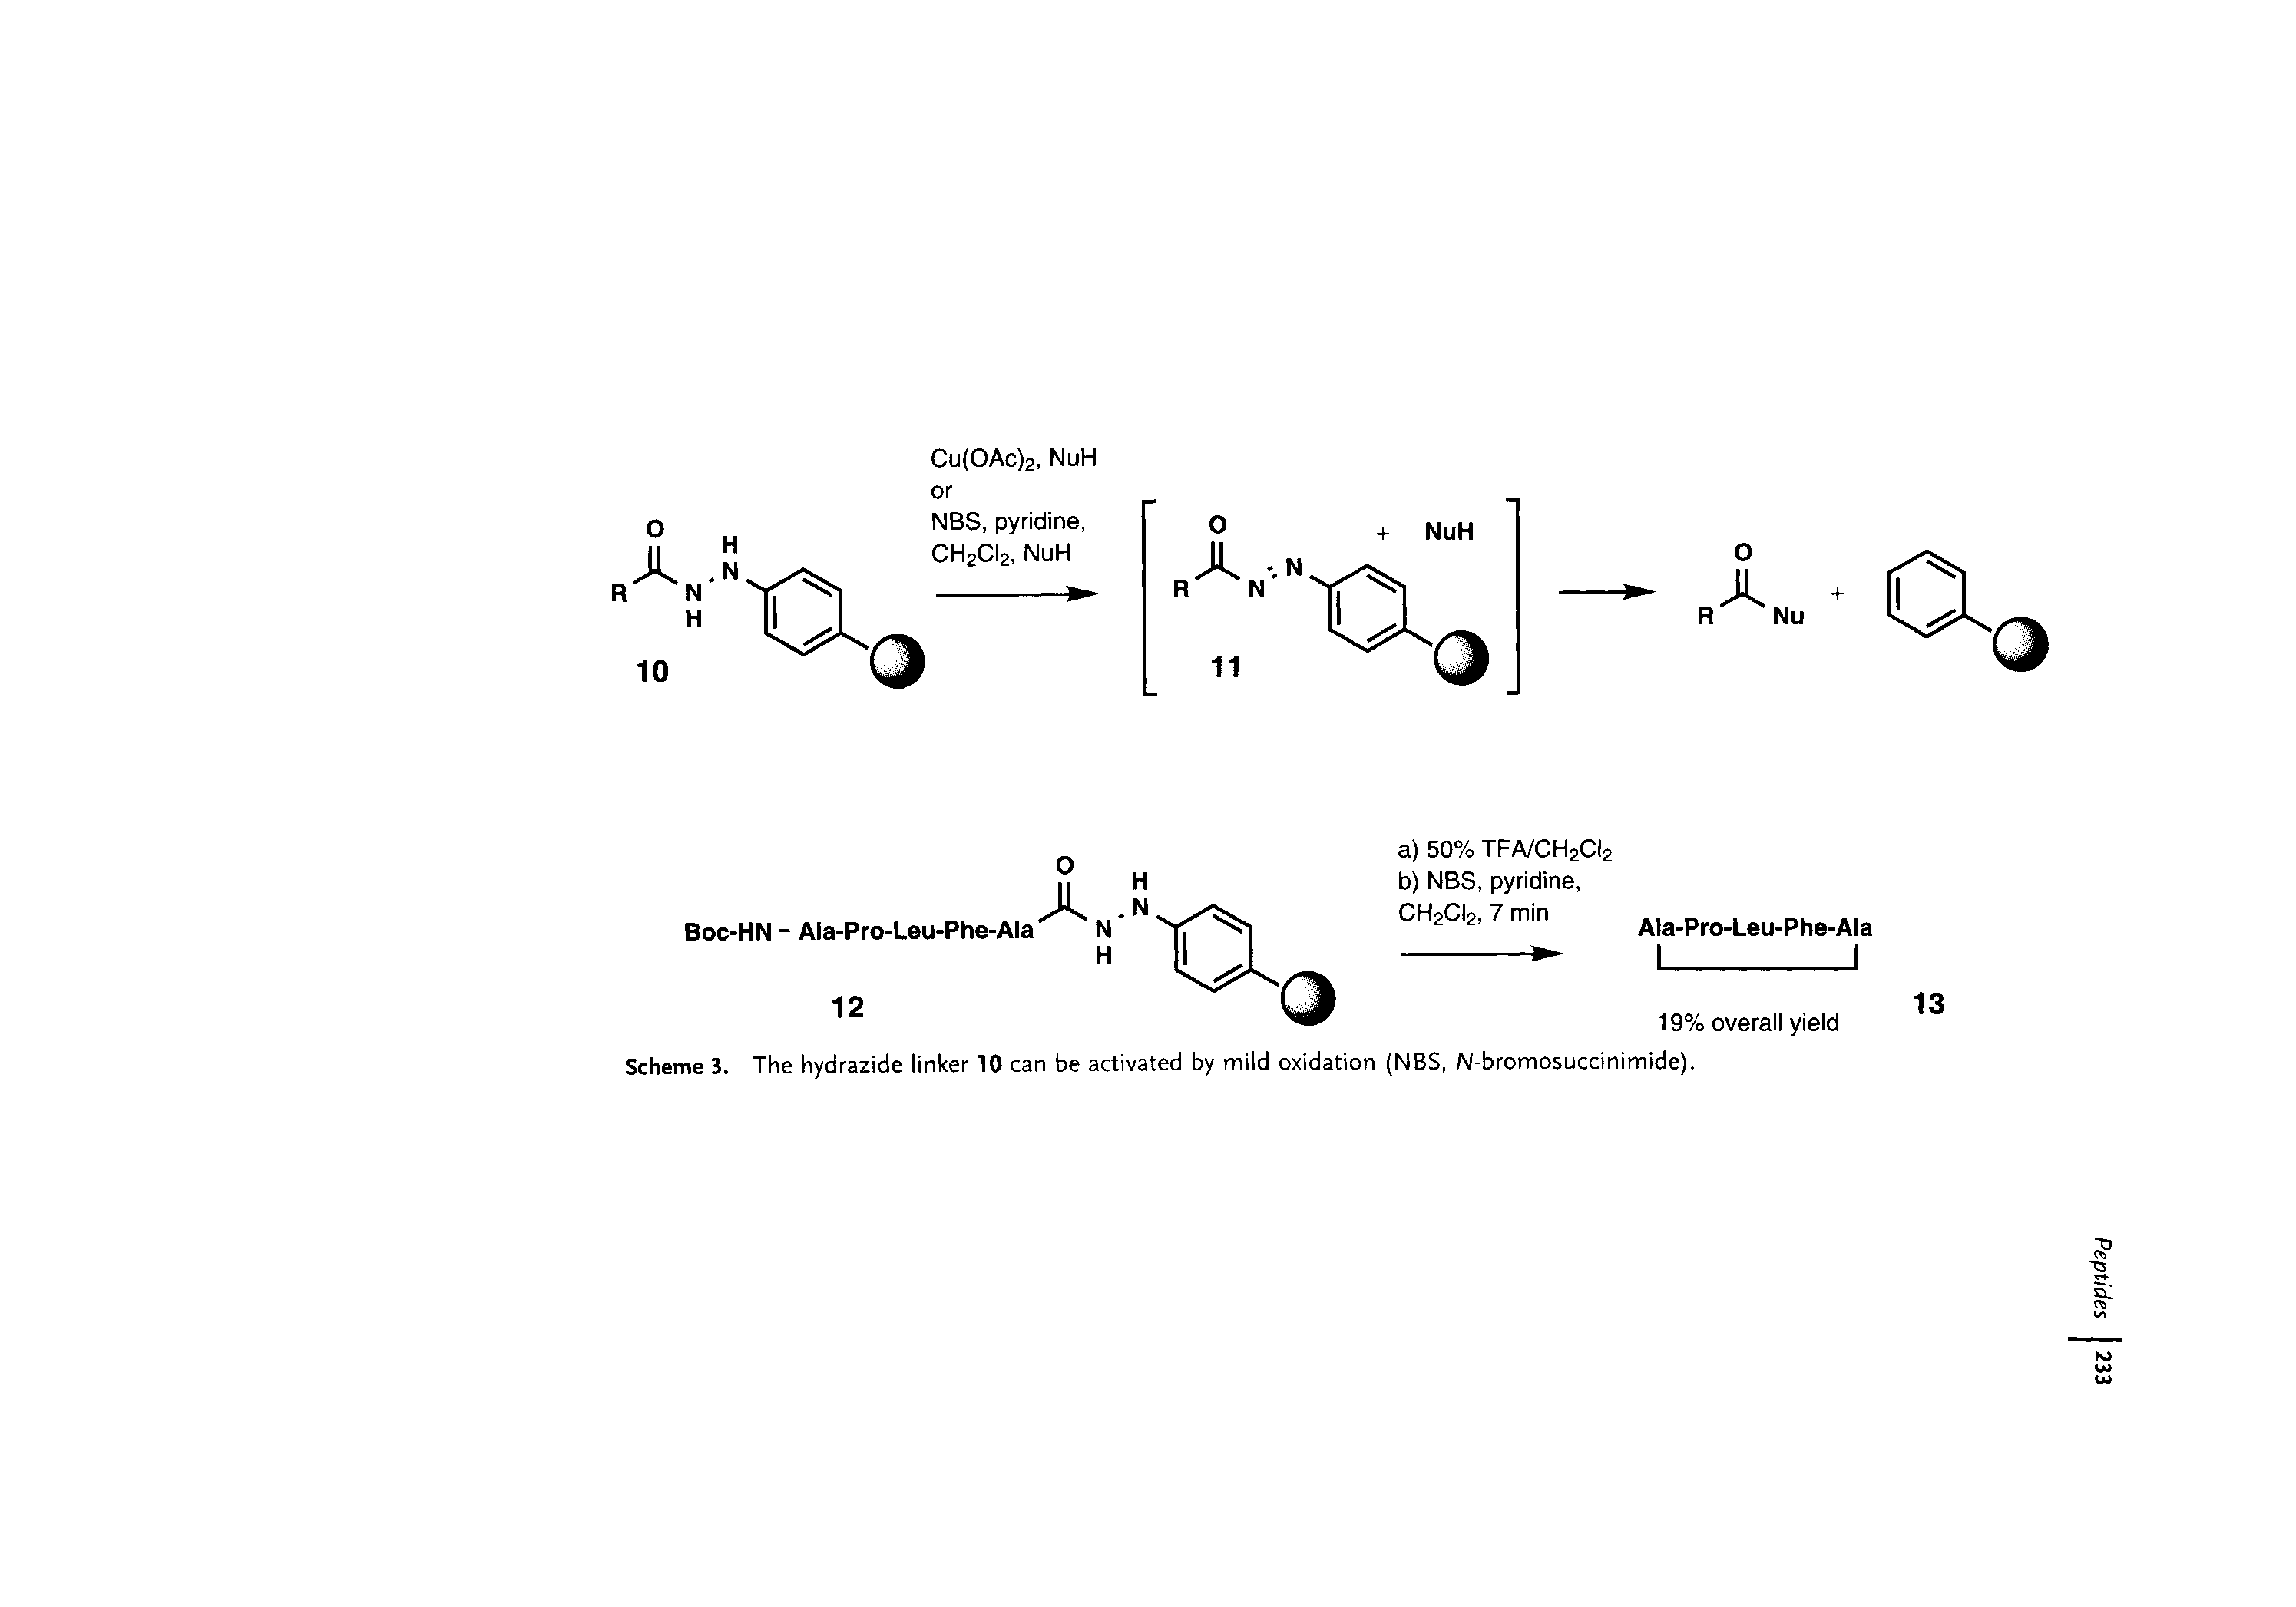 Scheme 3. The hydrazide linker 10 can be activated by mild oxidation (NBS, N-bromosuccinimide).